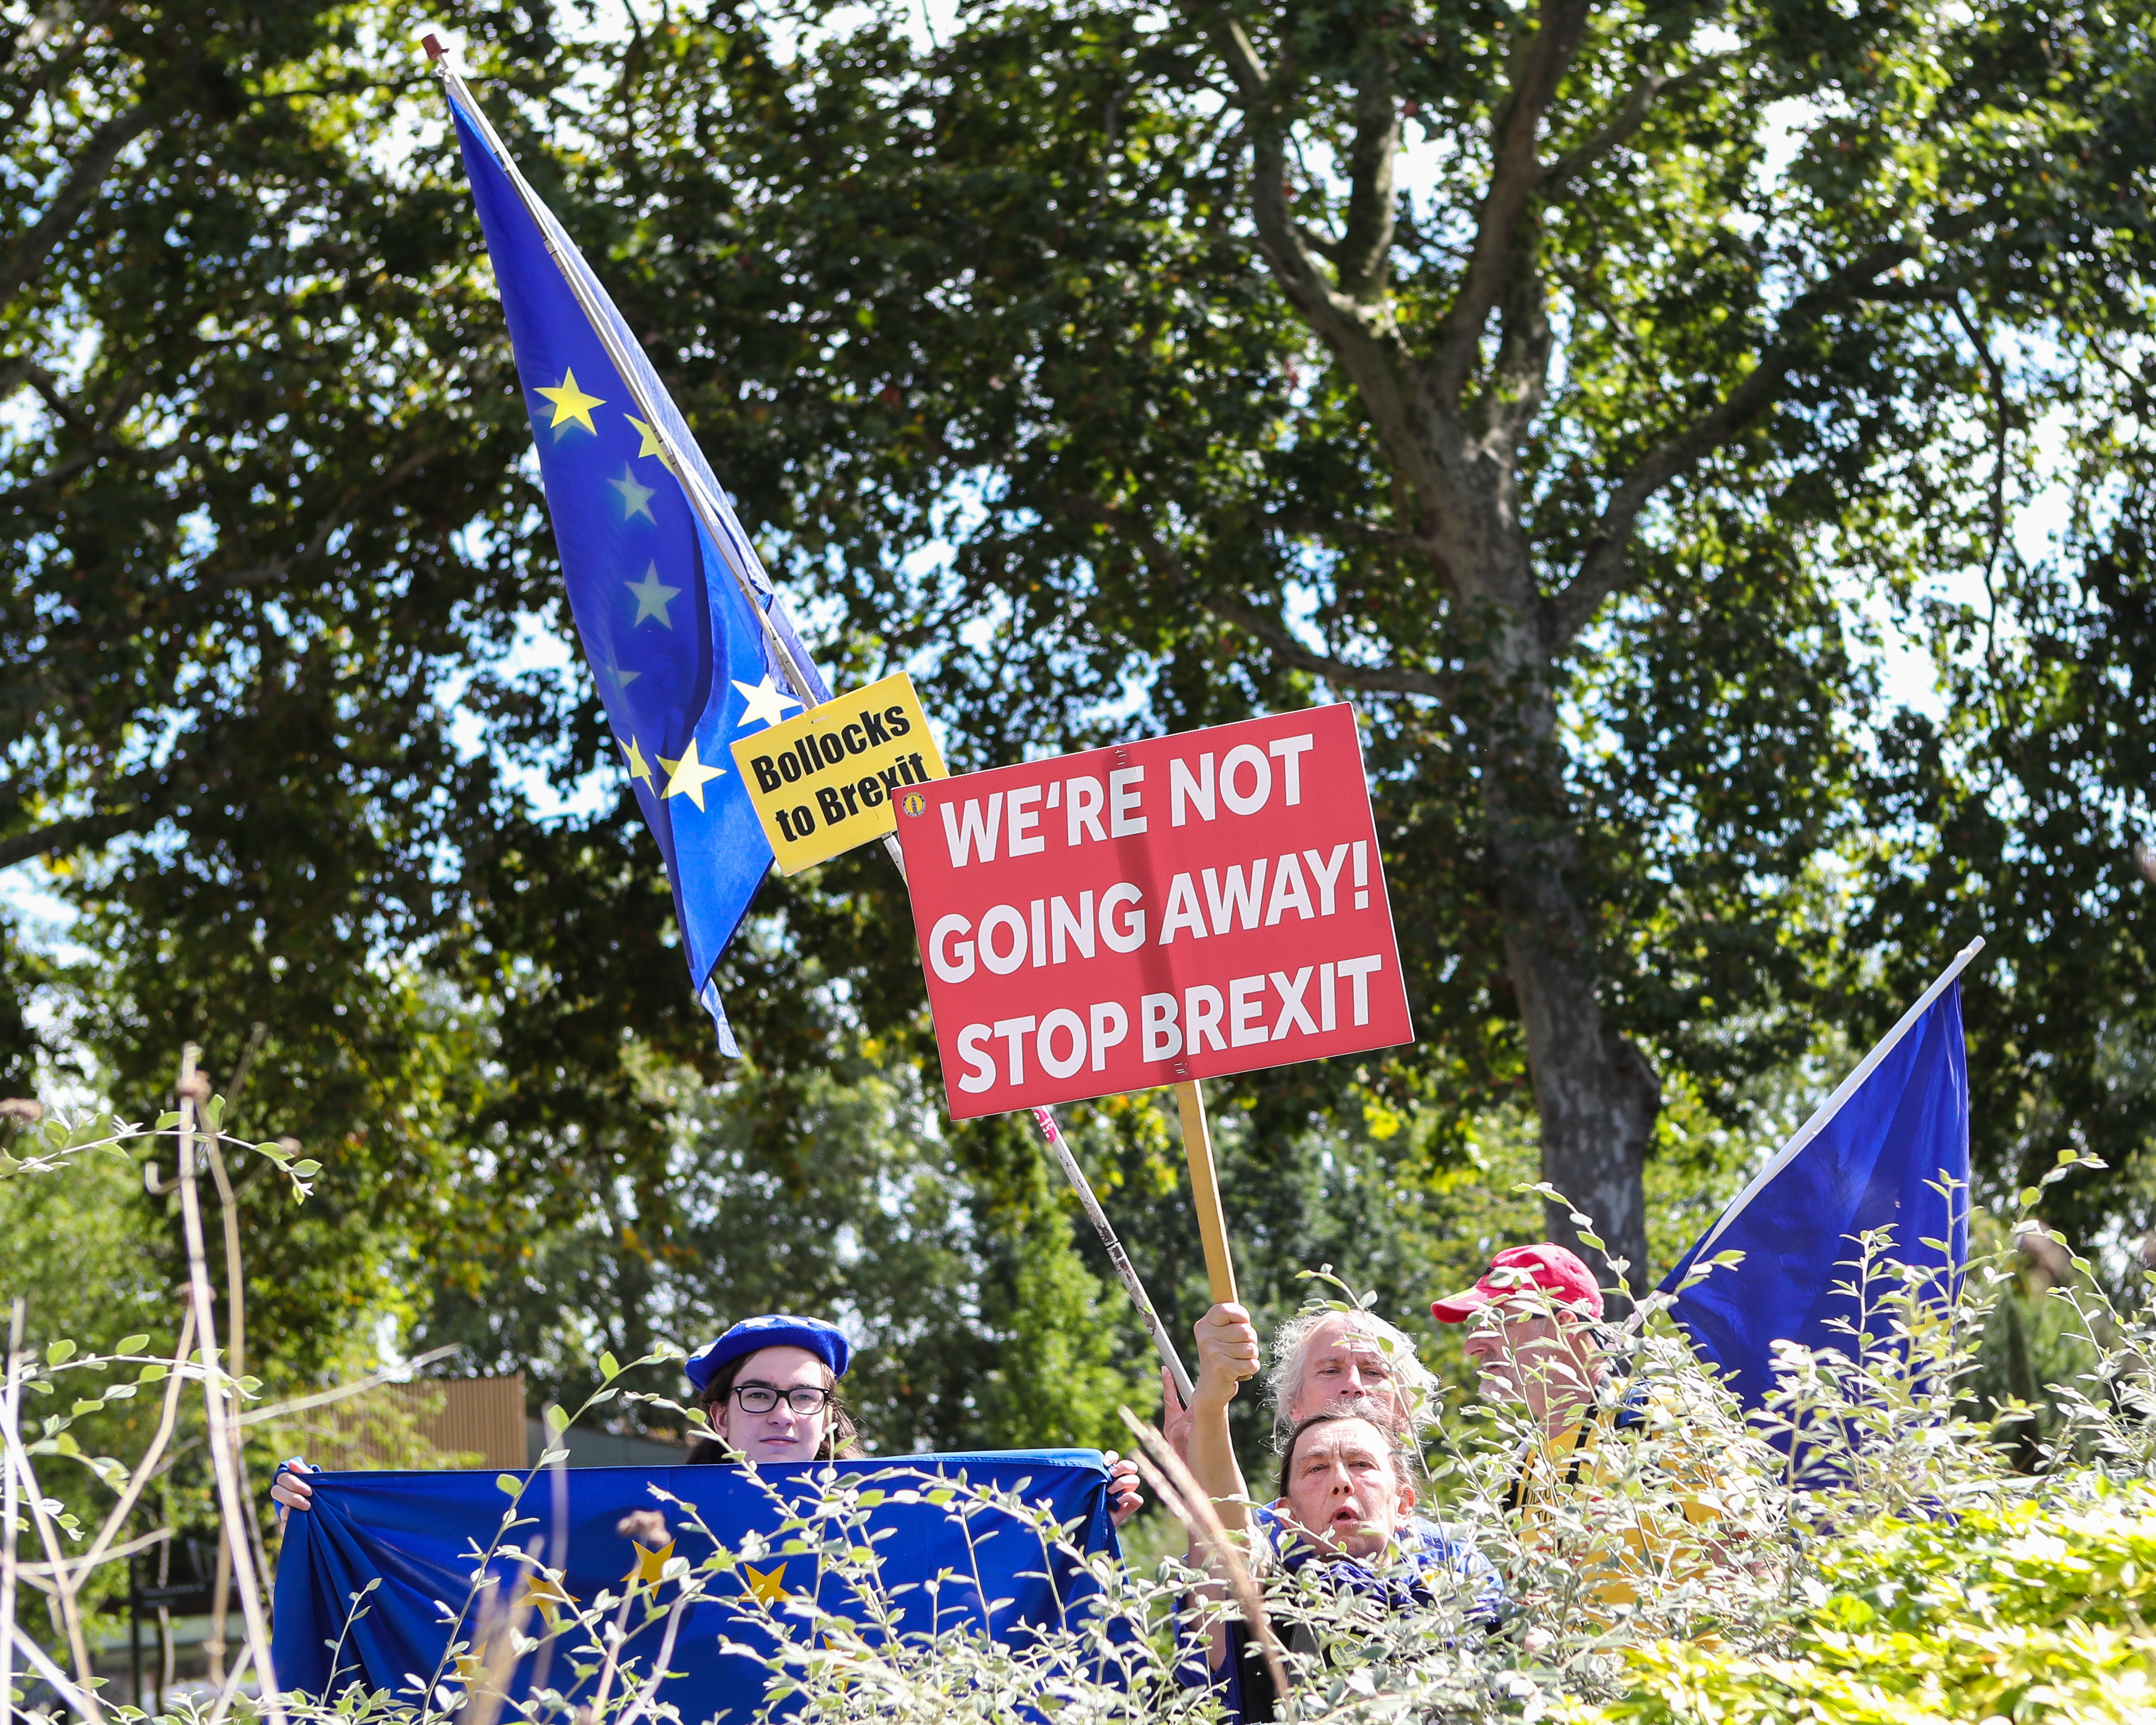 Protesters against Brexit and the governments request to prorogue Parliaments gather on College Green in London, England.